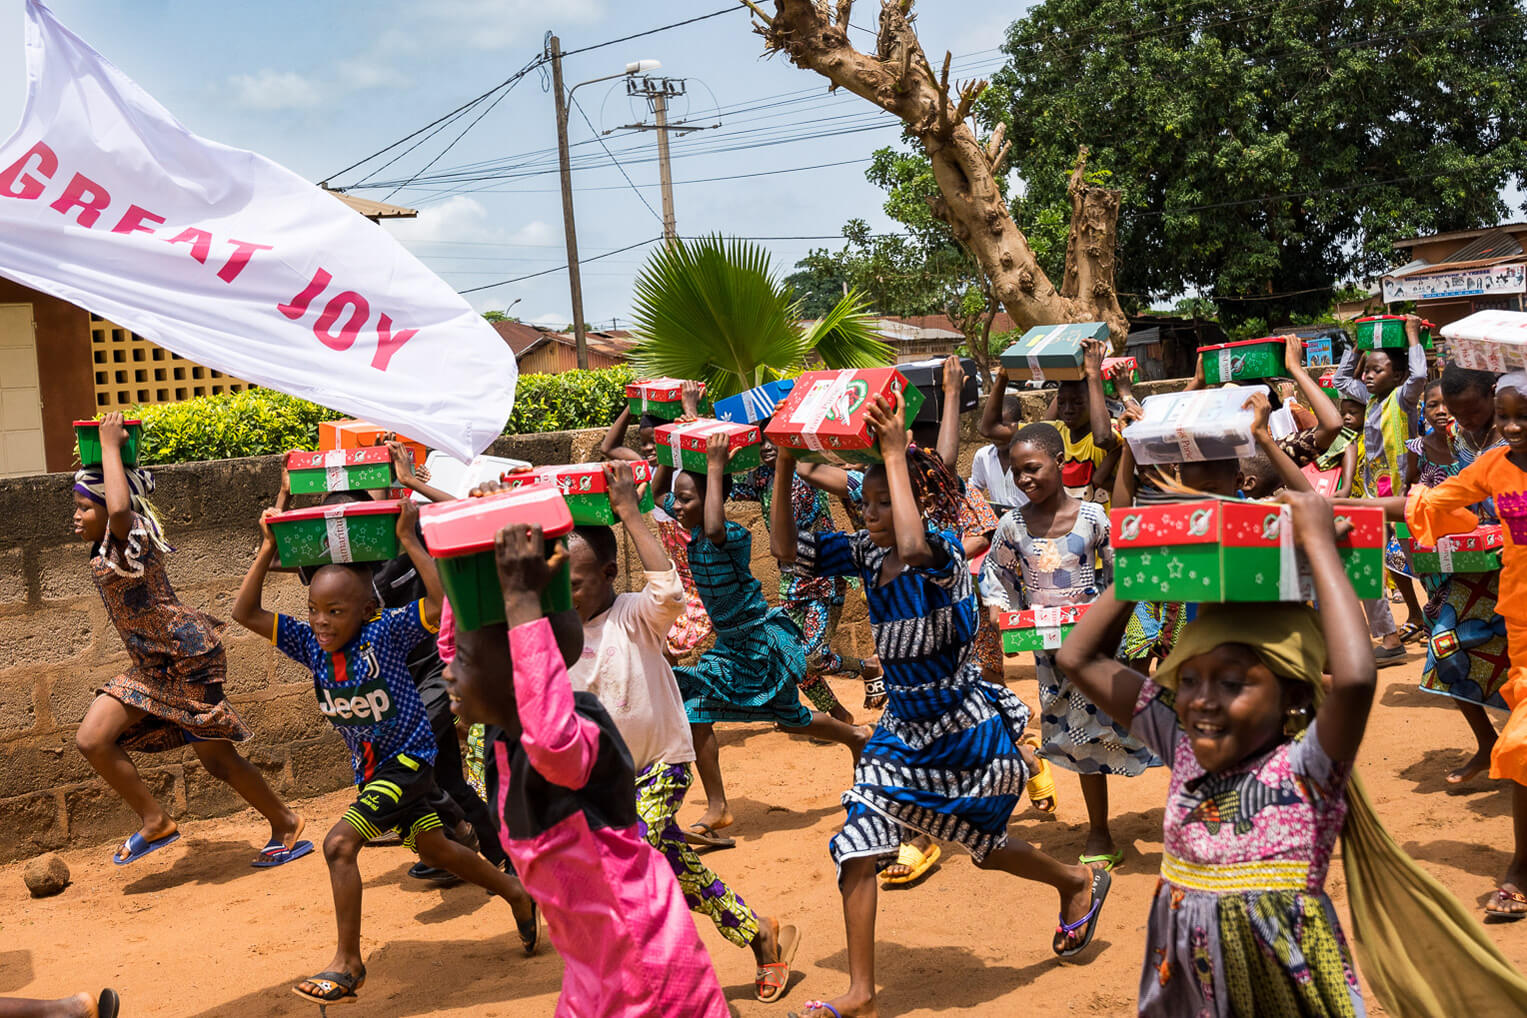 Many children in Benin have heard and believed the Gospel through Operation Christmas Child Outreach Events.